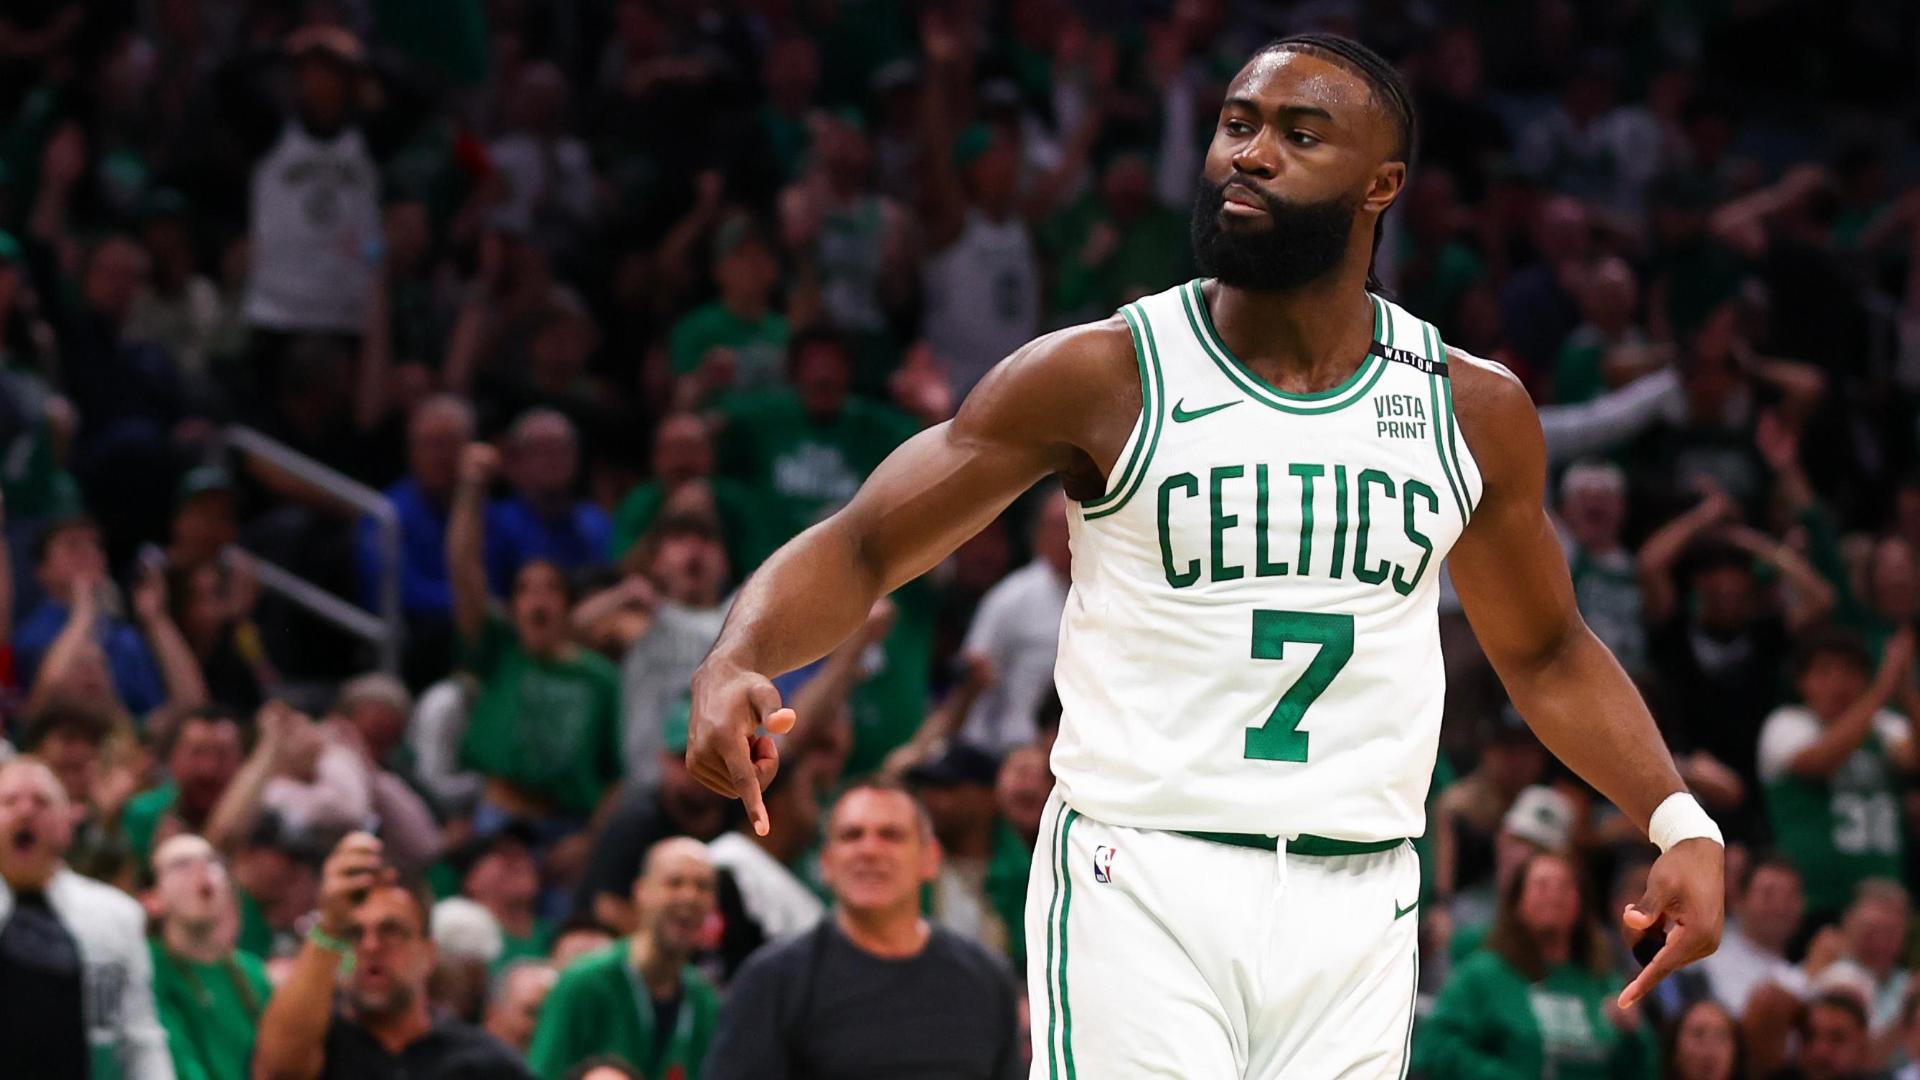 Celtics dominant as they take Game 1 of the NBA Finals